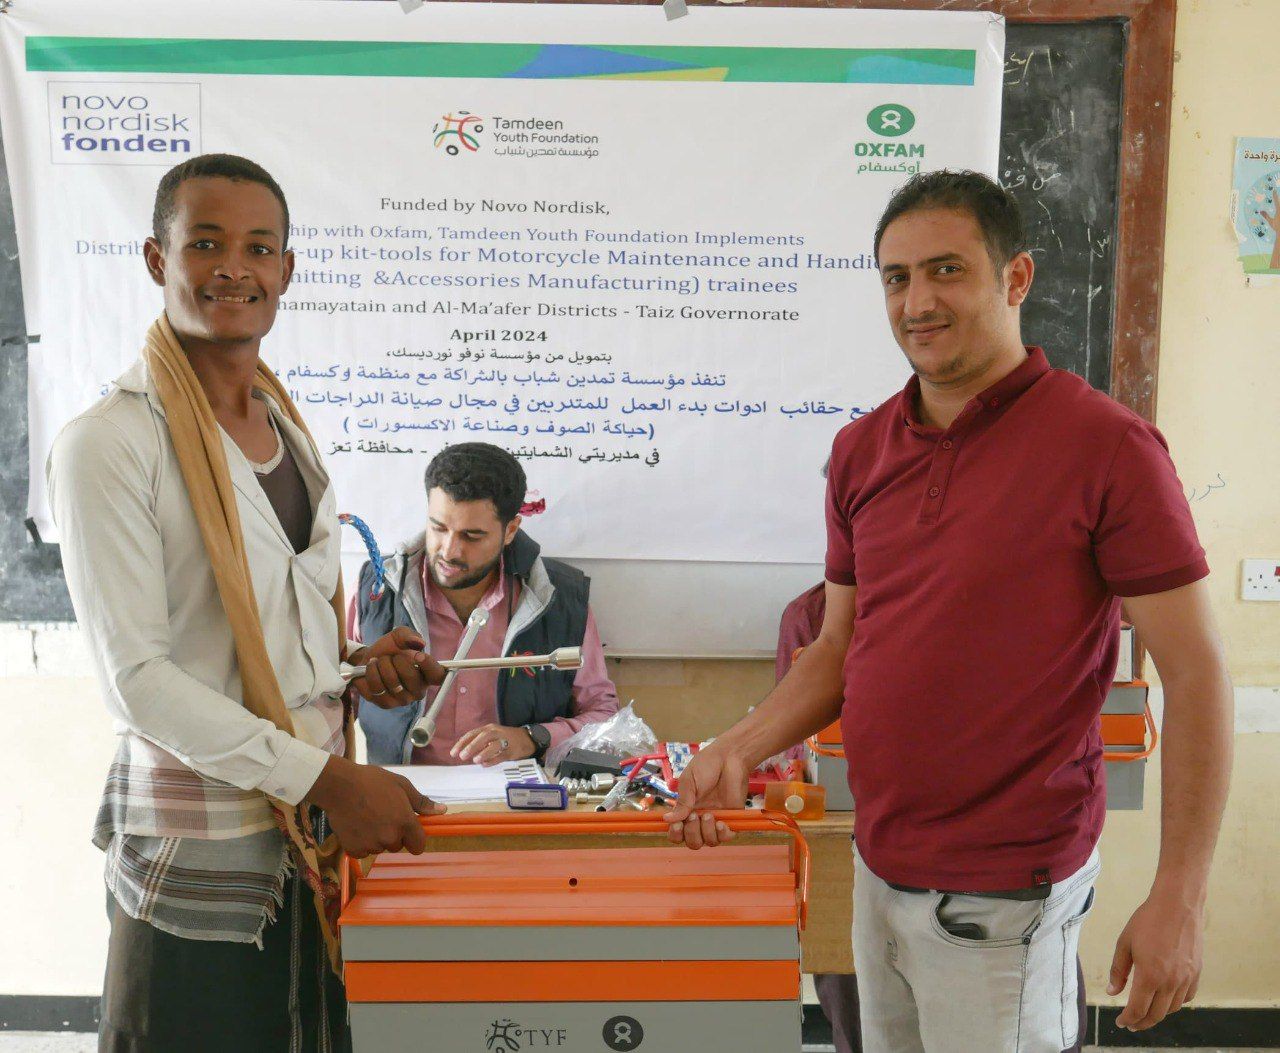 Distribution of Start-up Toolkits for 40 Youth in Taiz